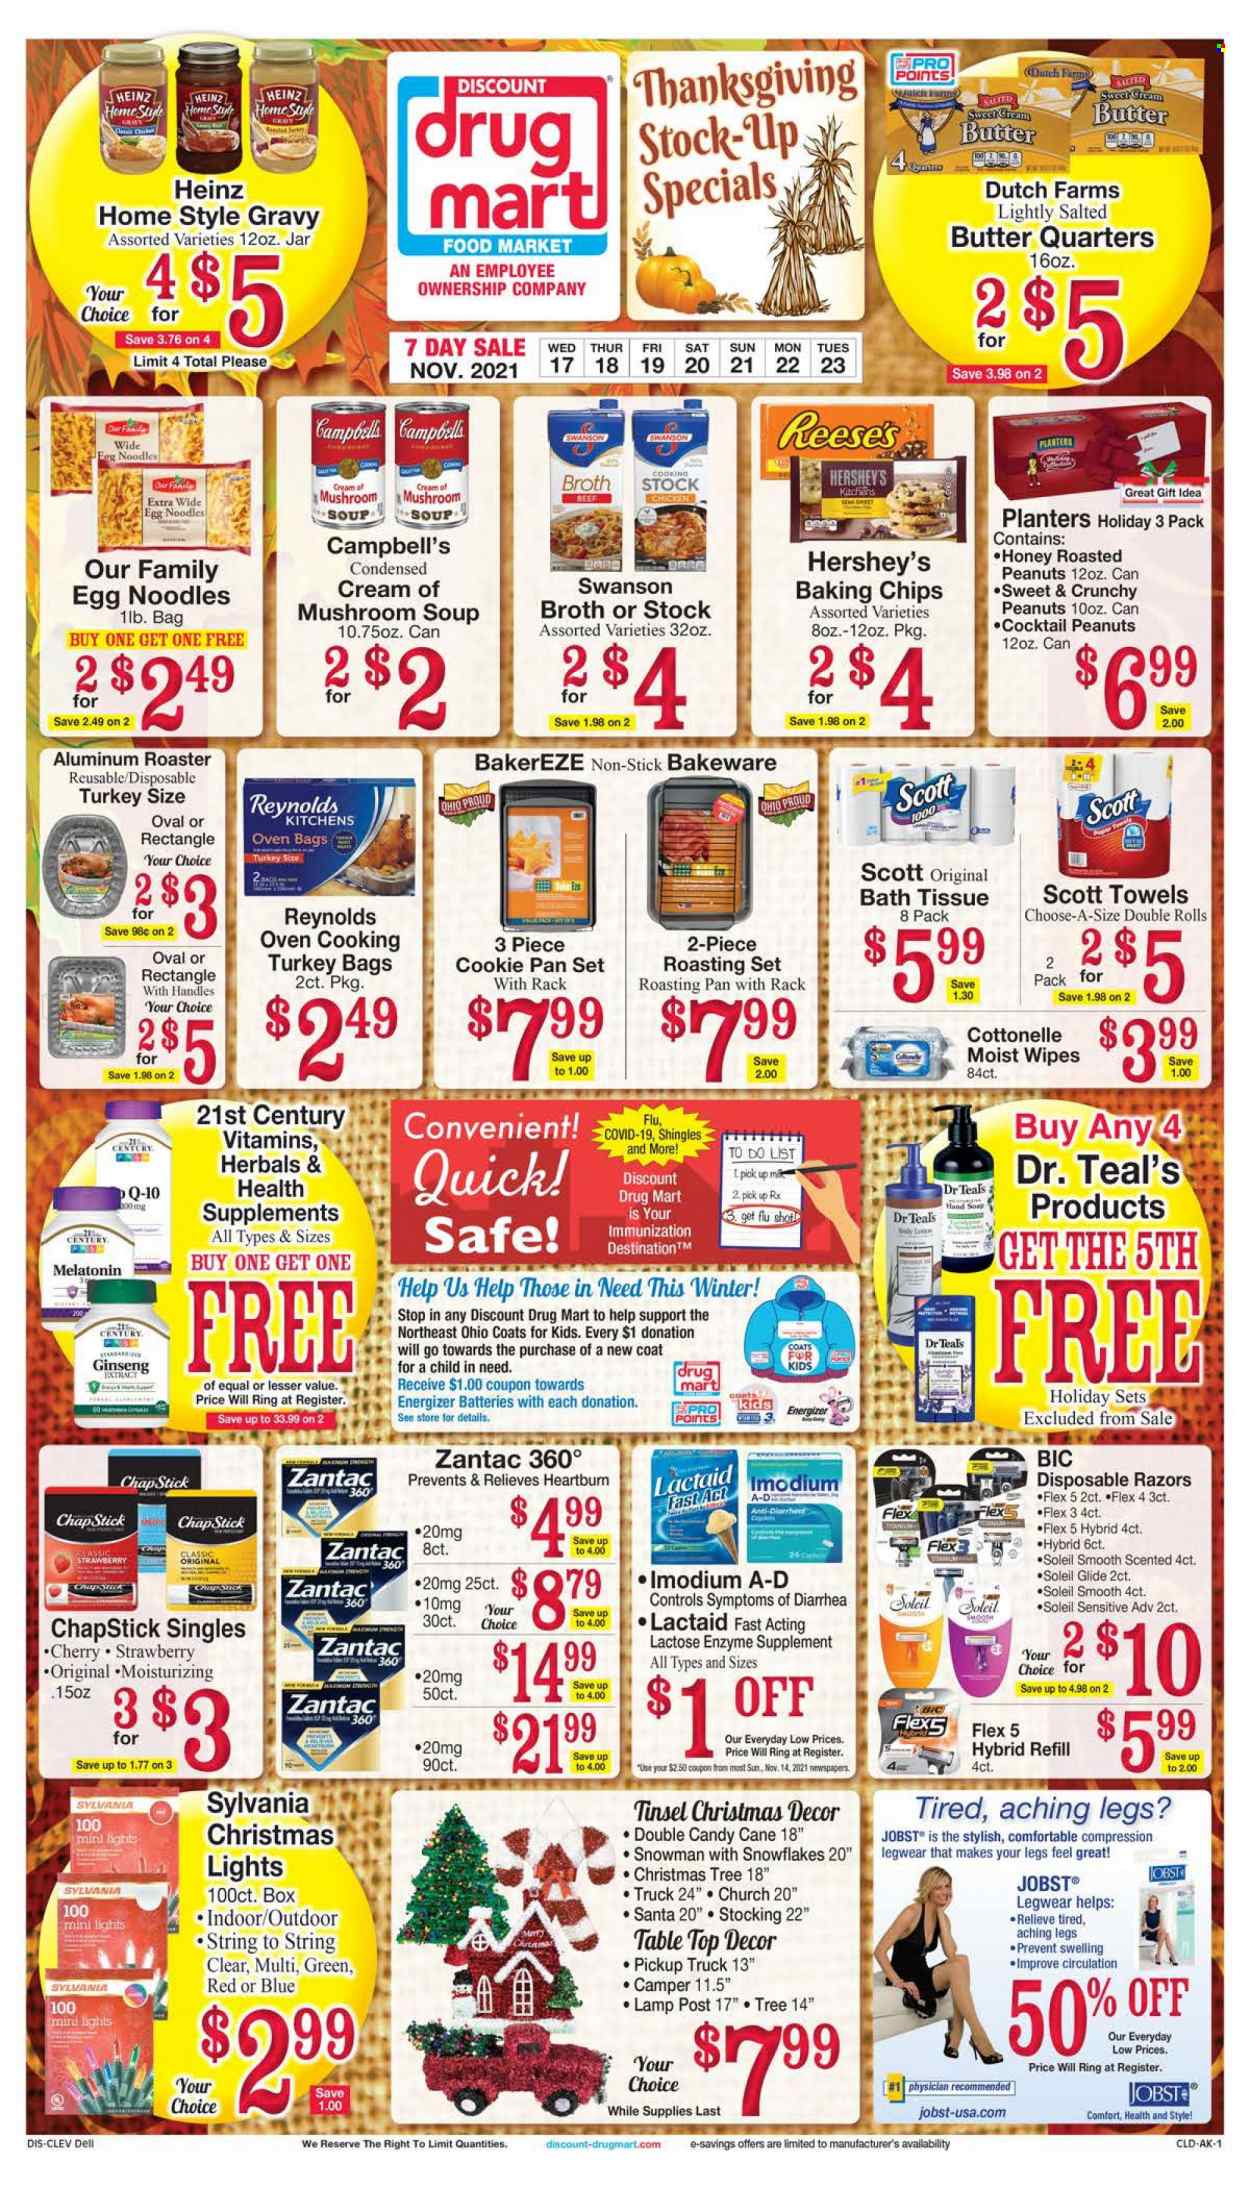 thumbnail - Discount Drug Mart Flyer - 11/17/2021 - 11/23/2021 - Sales products - cherries, Campbell's, mushroom soup, soup, noodles, butter, salted butter, Reese's, Hershey's, candy cane, Santa, broth, baking chips, Heinz, egg noodles, roasted peanuts, peanuts, Planters, wipes, bath tissue, Cottonelle, Scott, paper towels, BIC, disposable razor, bakeware, battery, Energizer, Sylvania, Melatonin, Zantac, Imodium, ginseng, health supplement. Page 1.